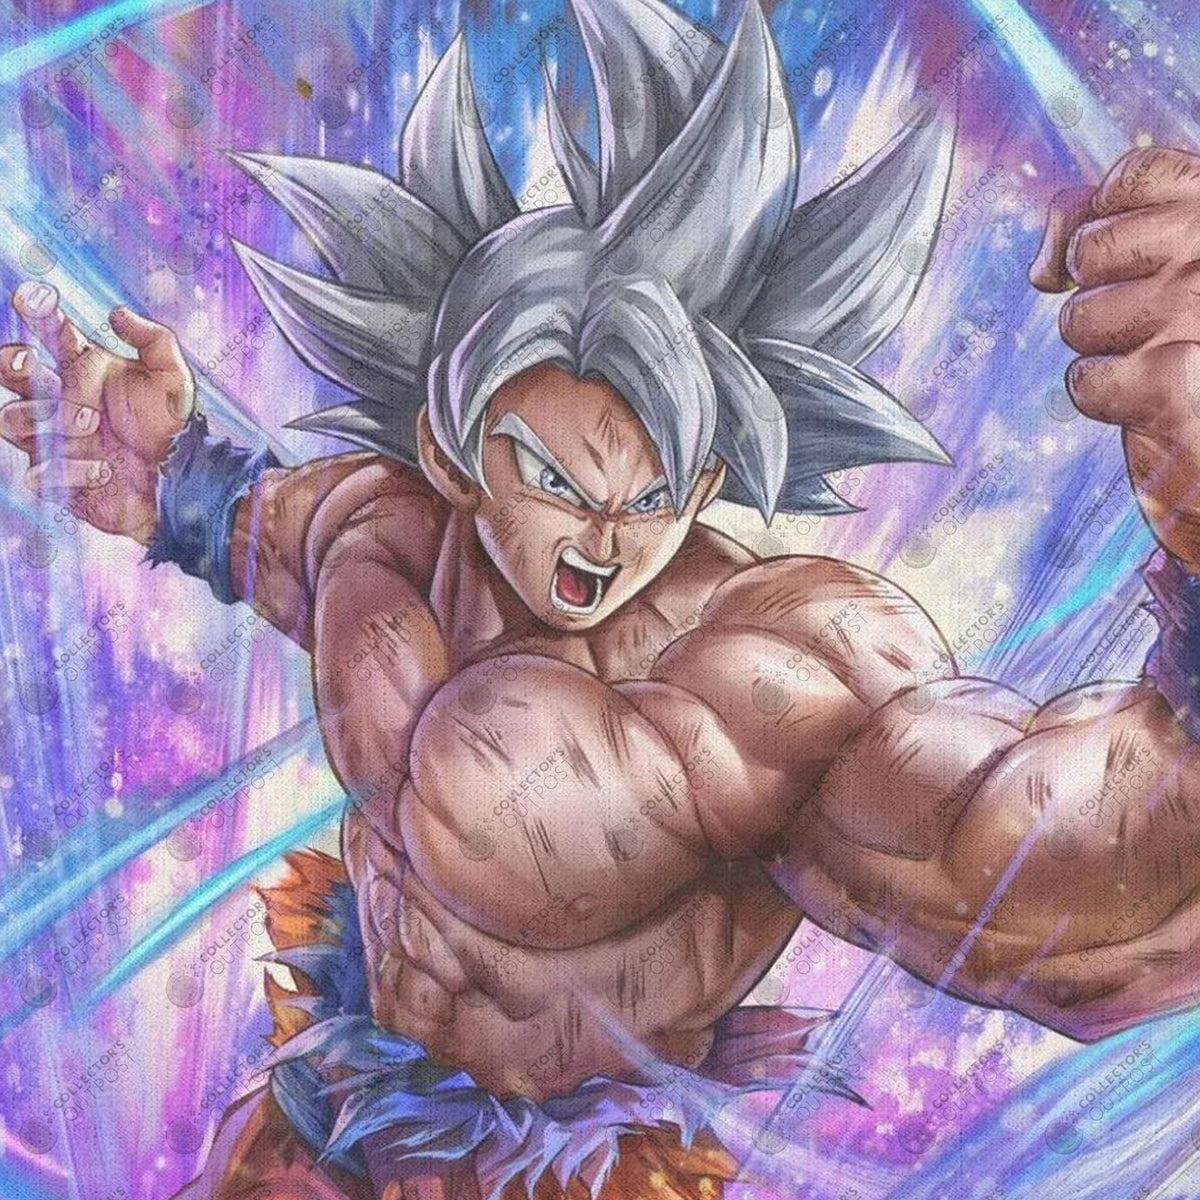 Hey, here's the commission artwork of Goku Mastered Ultra Instinct